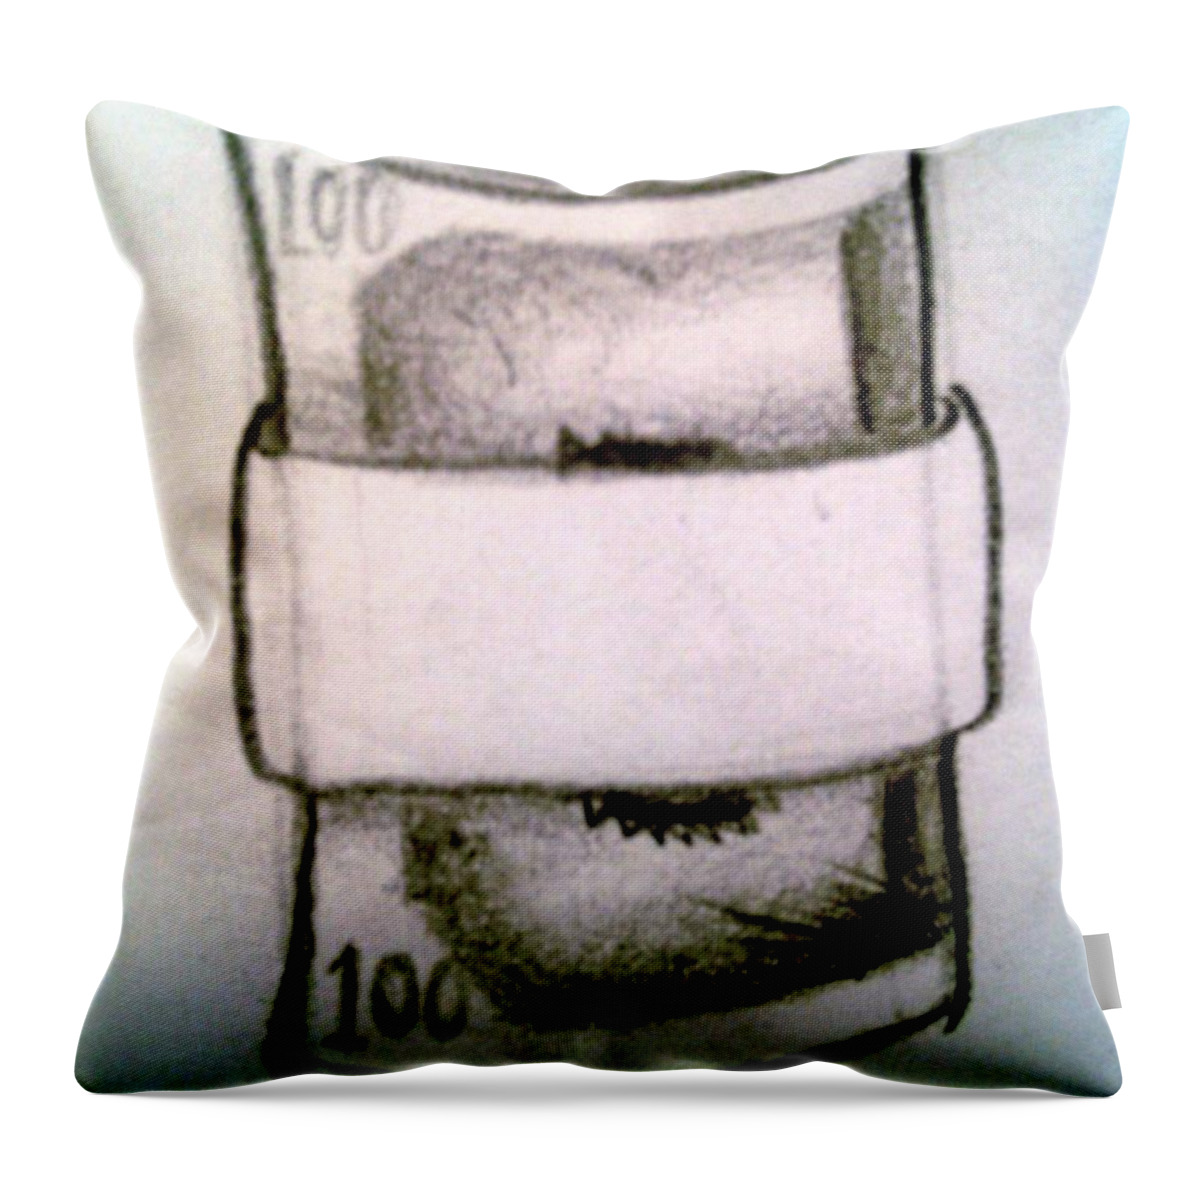 Black Art Throw Pillow featuring the drawing Untitled 16 by A S 